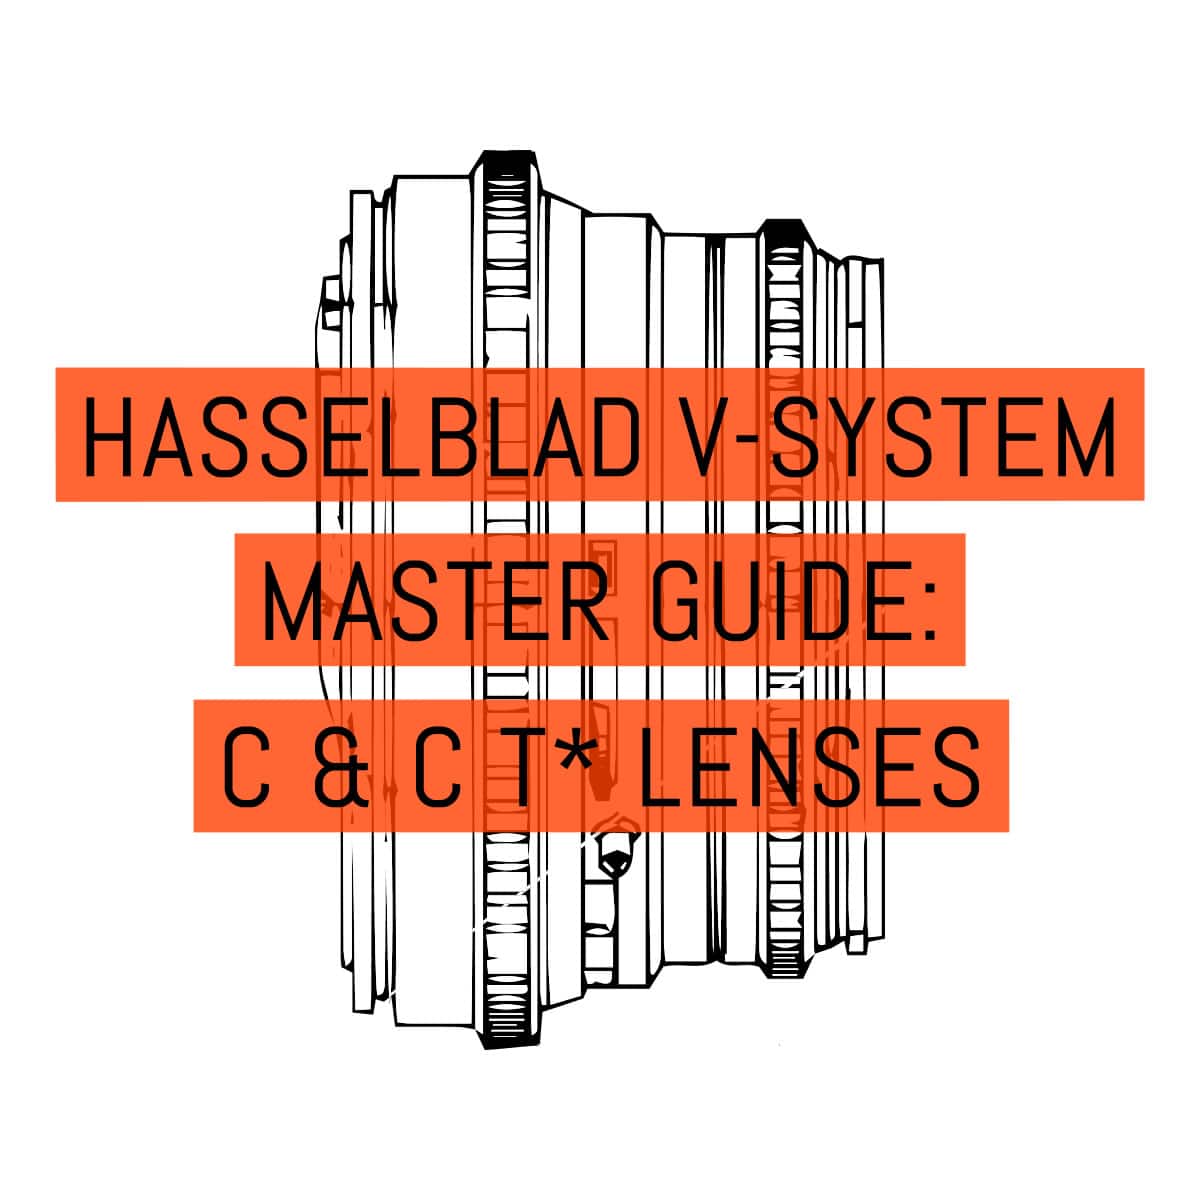 The Hasselblad V-system master guide: C and C T* lenses